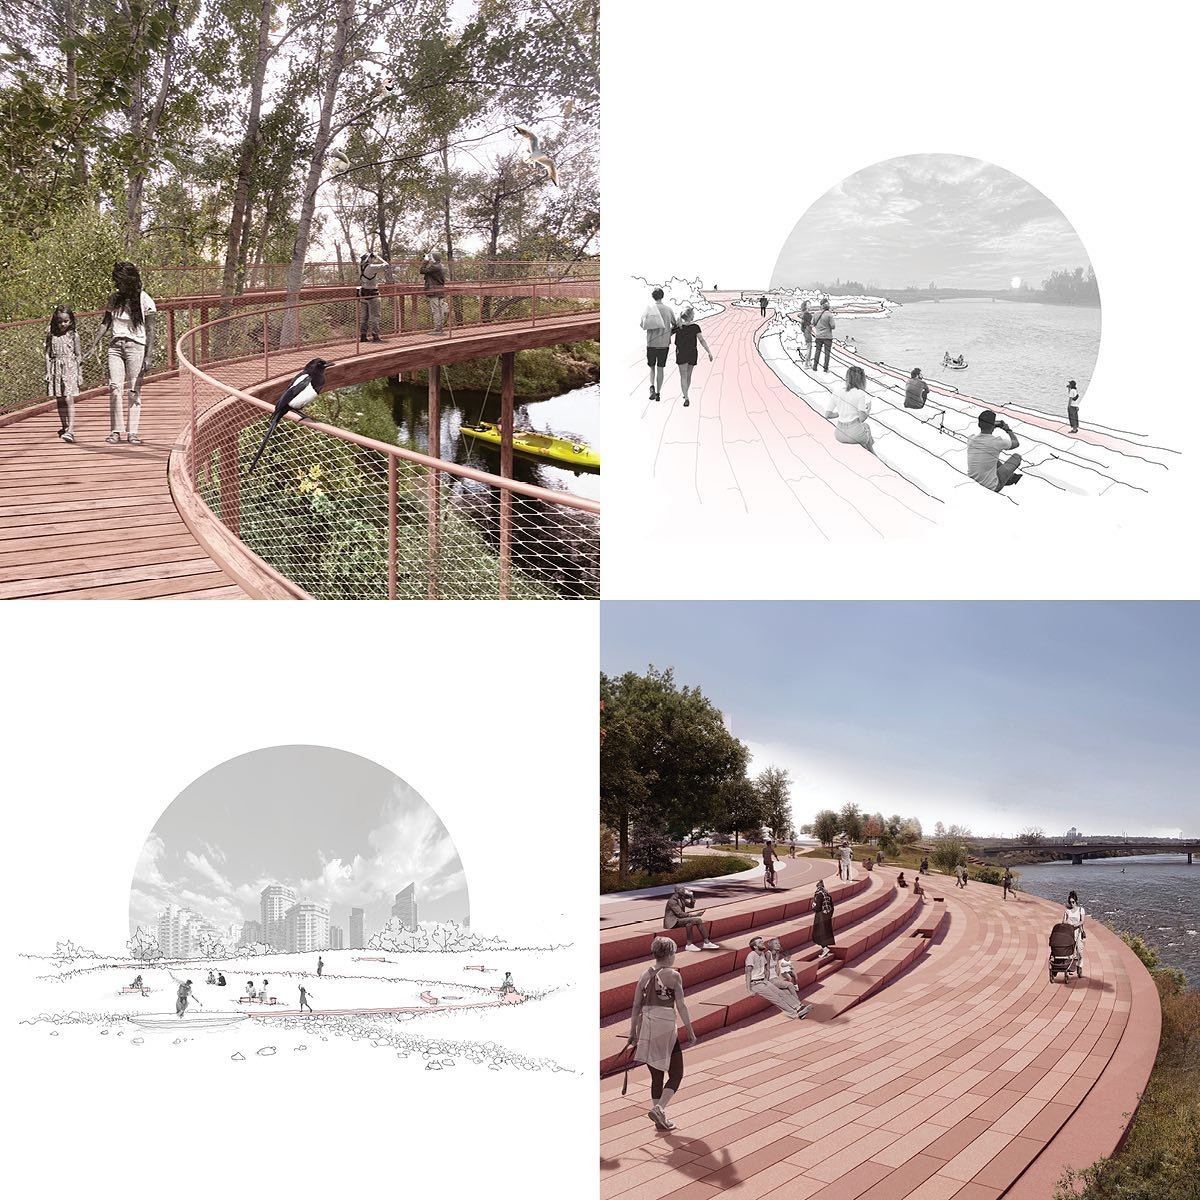 We are thrilled to announce that our design for RiverWalk West has been awarded an RAIC National Urban Design Award. Click the link in the bio for more info.

In collaboration with @groundcubed,&nbsp;@martinsongolly,&nbsp;@rjc_engineers,&nbsp;@jaredt